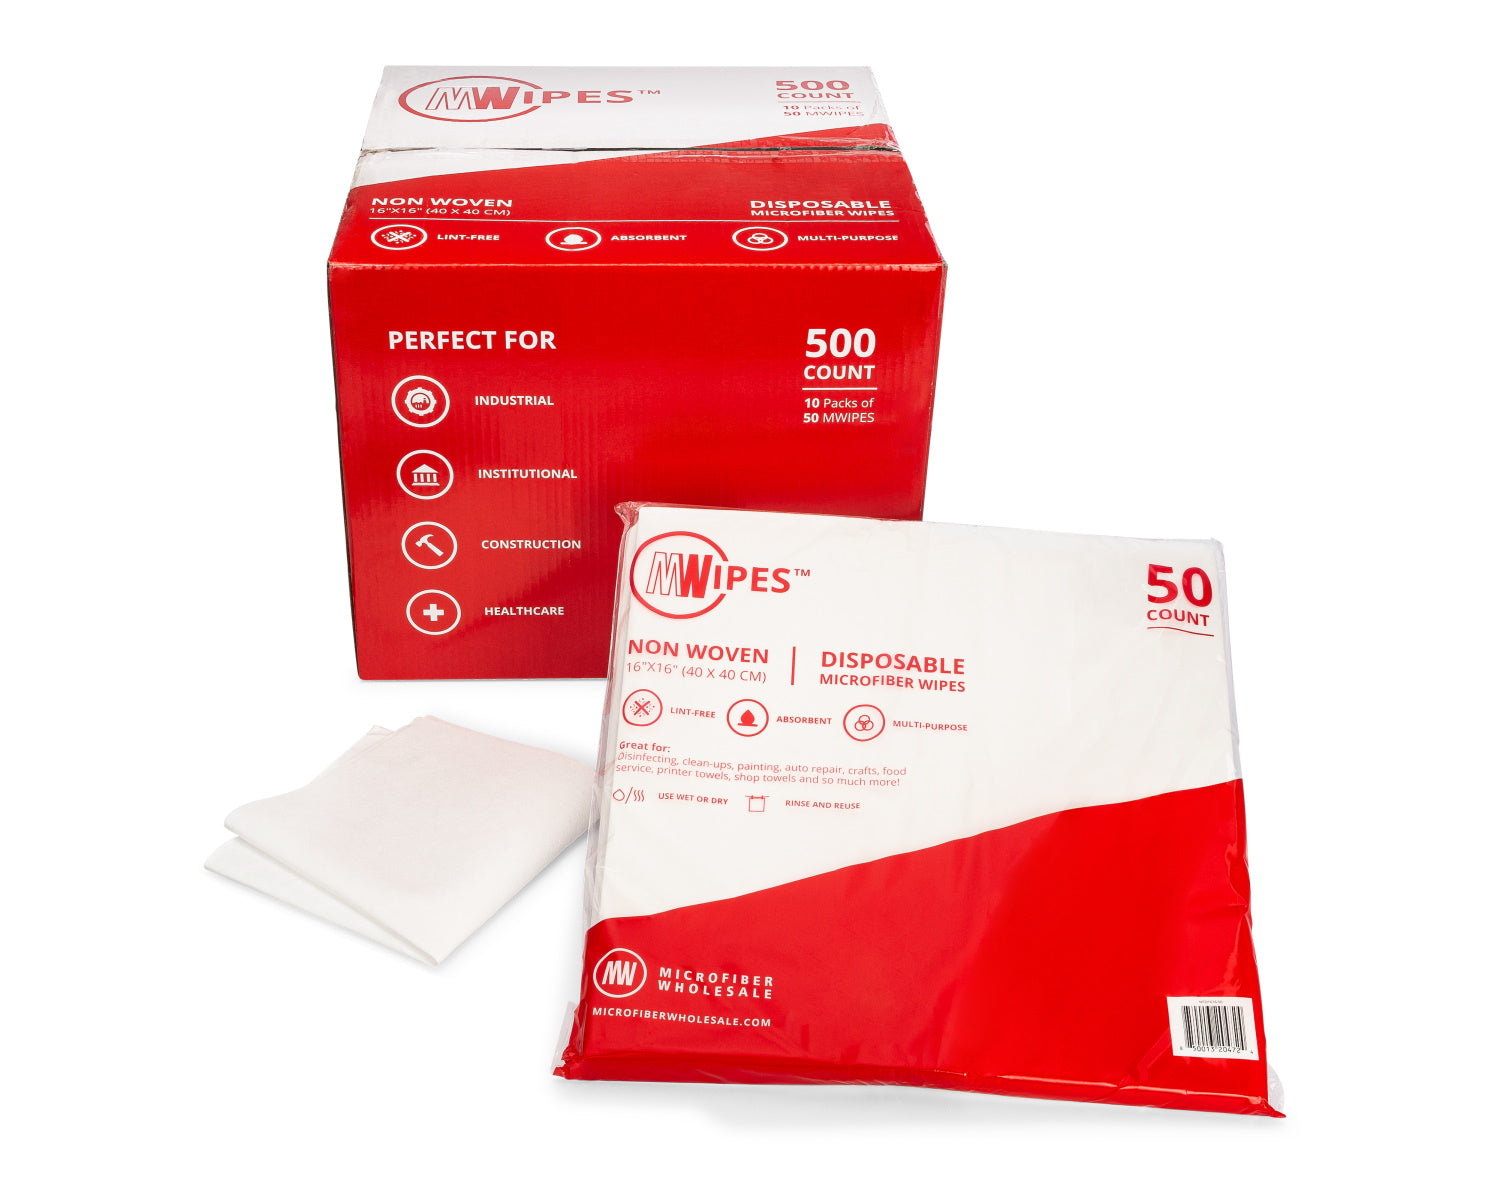 16x16 Disposable Microfiber MWipes™ Cloths - Case of 500